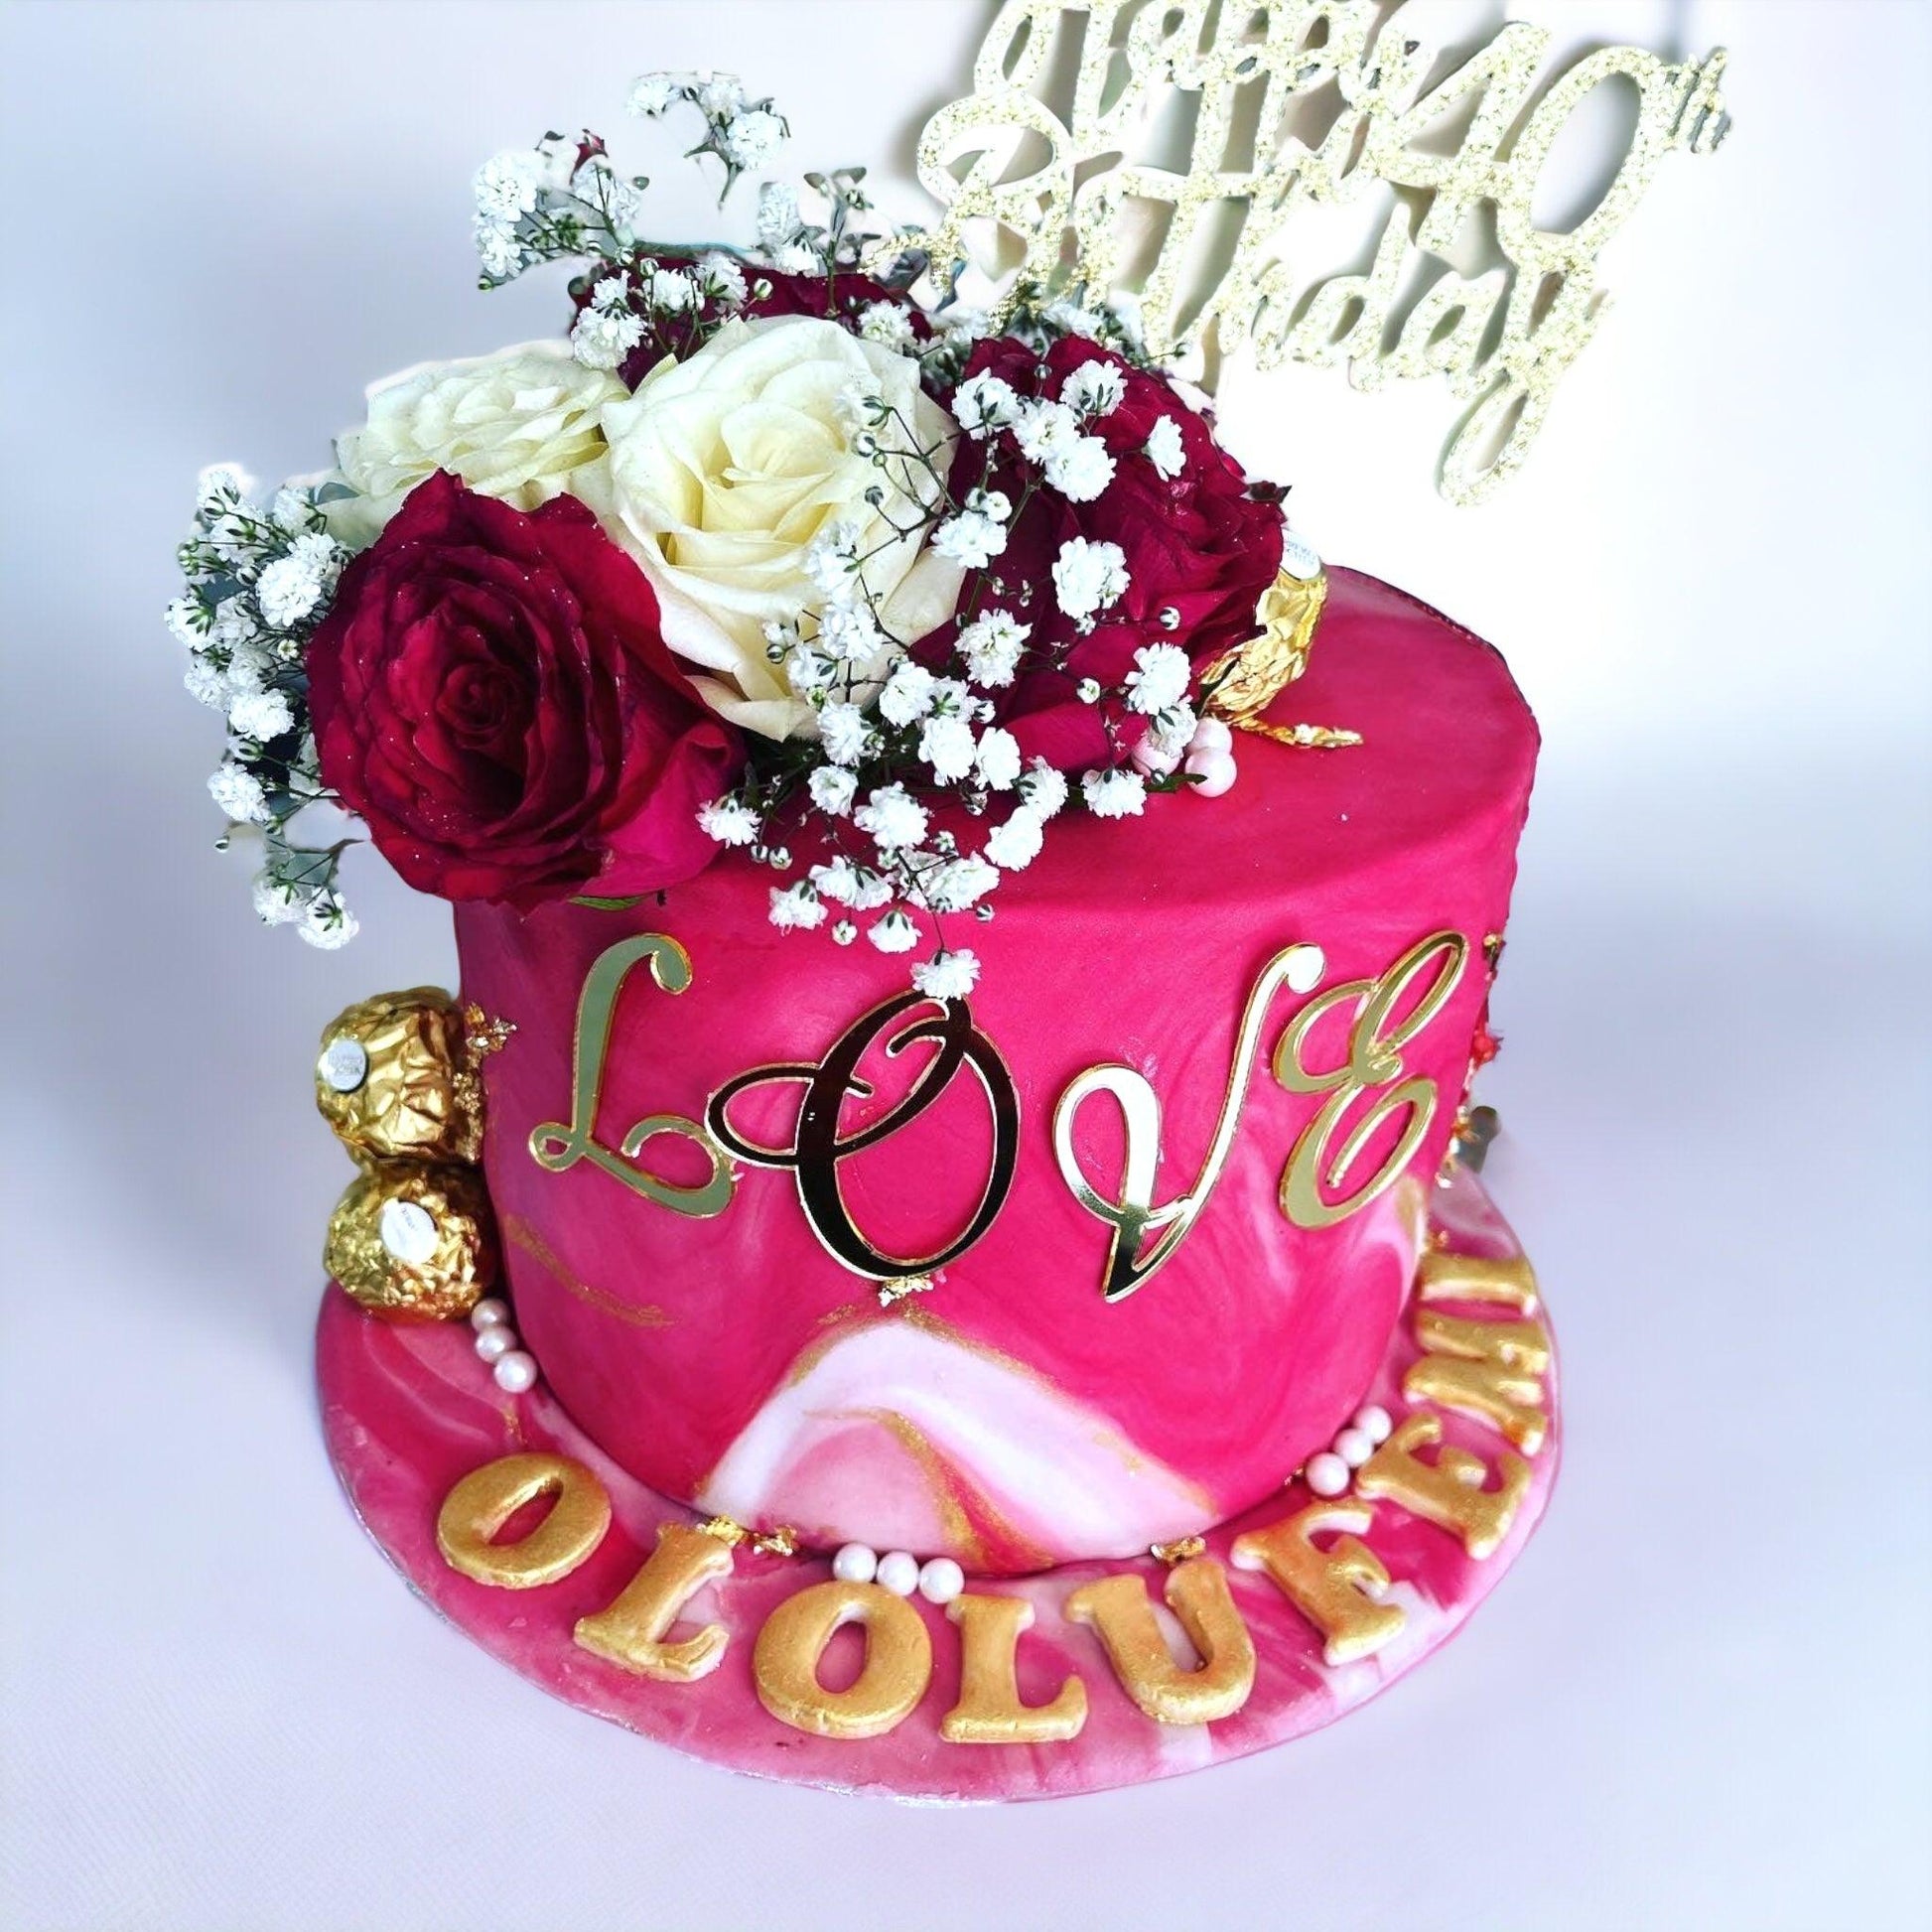 Customised Birthday cake for order in Romford – Naturally_deliciousss